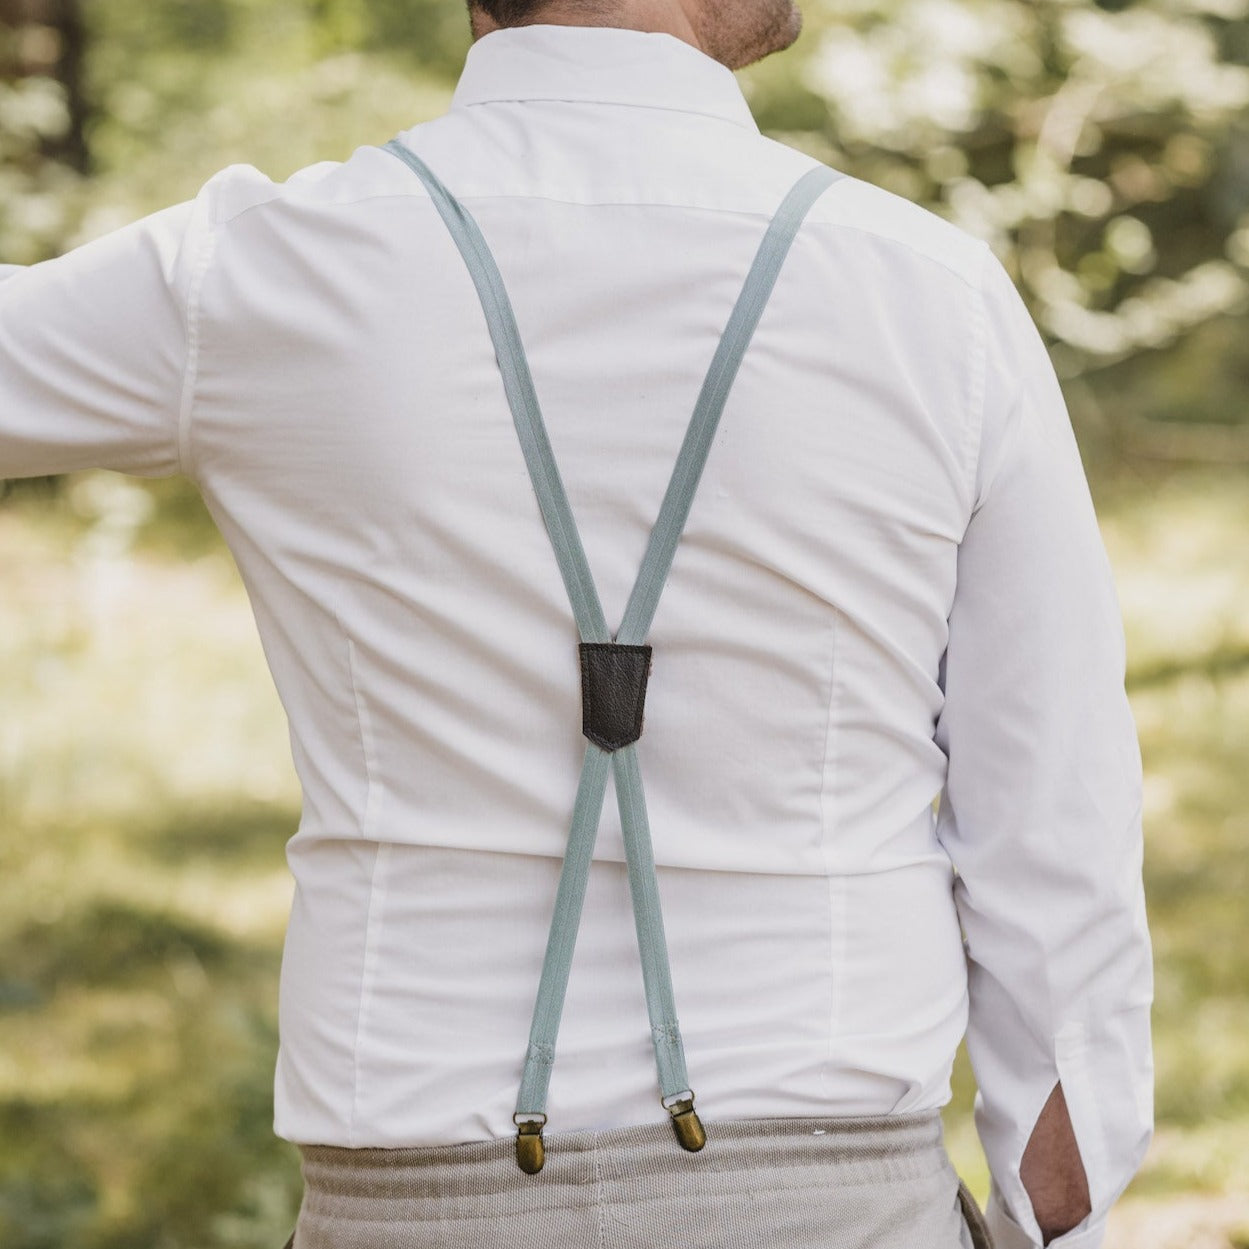 Suspenders Narrow for adults